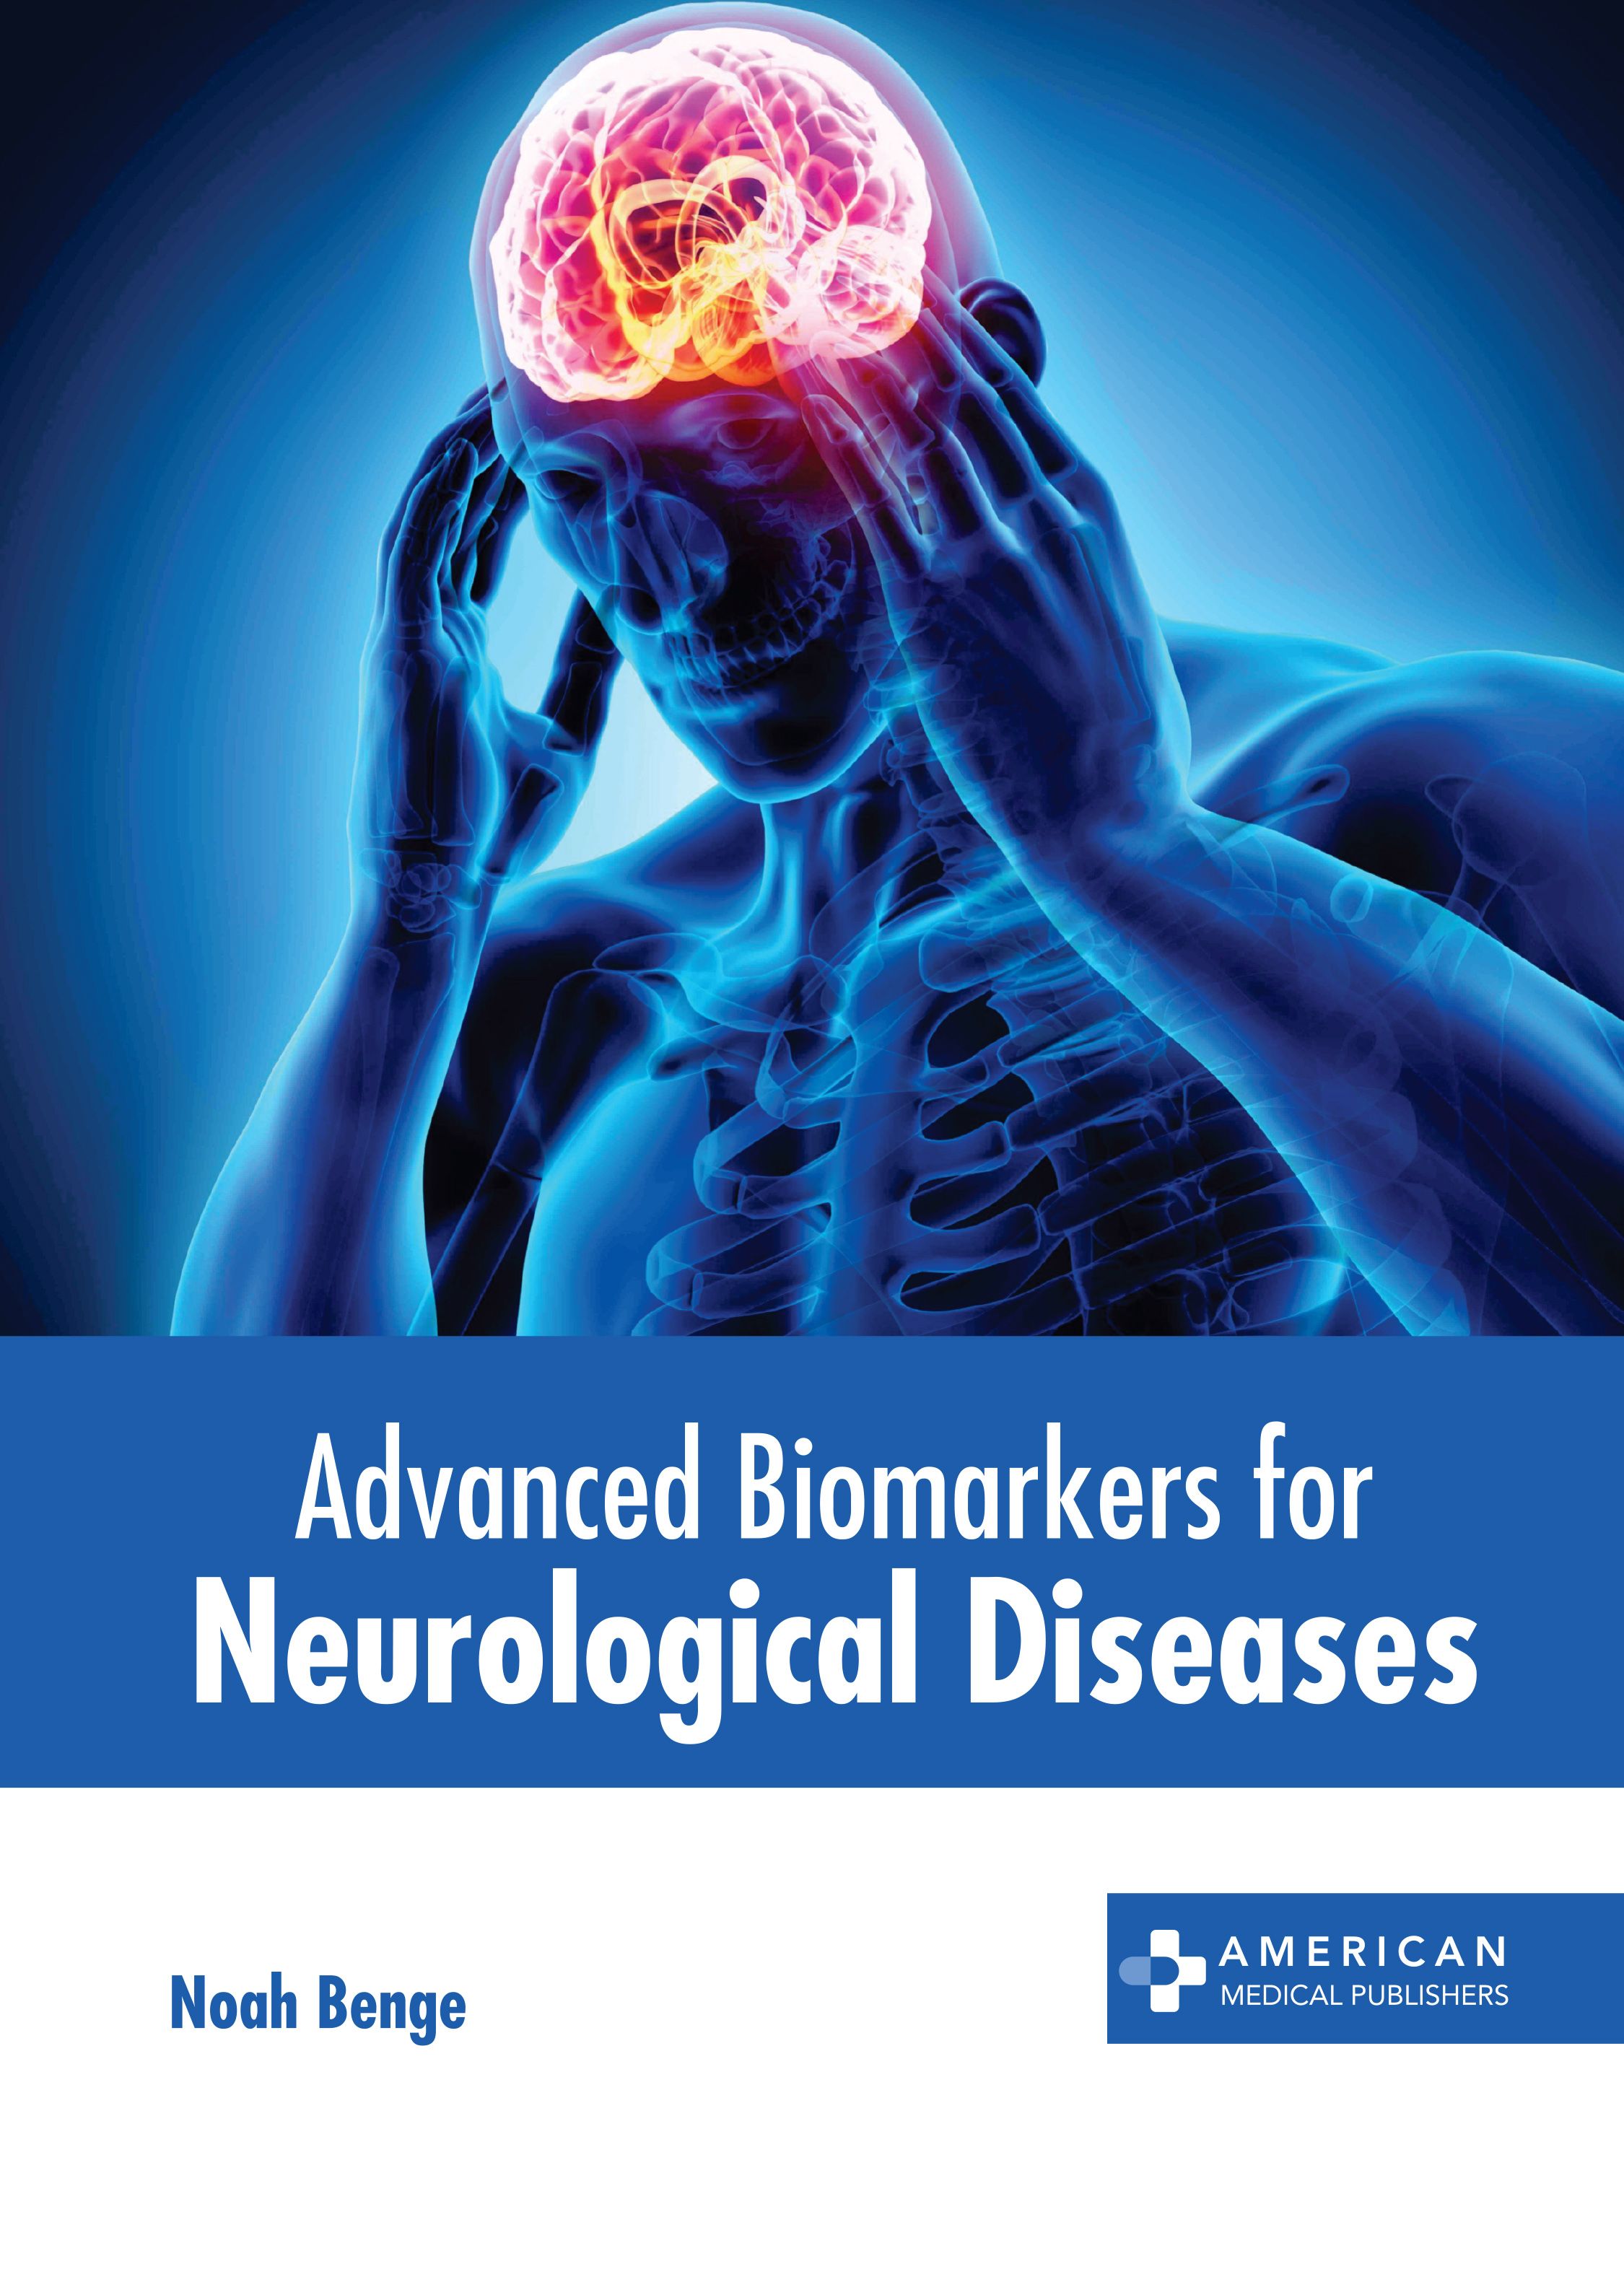 

exclusive-publishers/american-medical-publishers/advanced-biomarkers-for-neurological-diseases-9798887403113